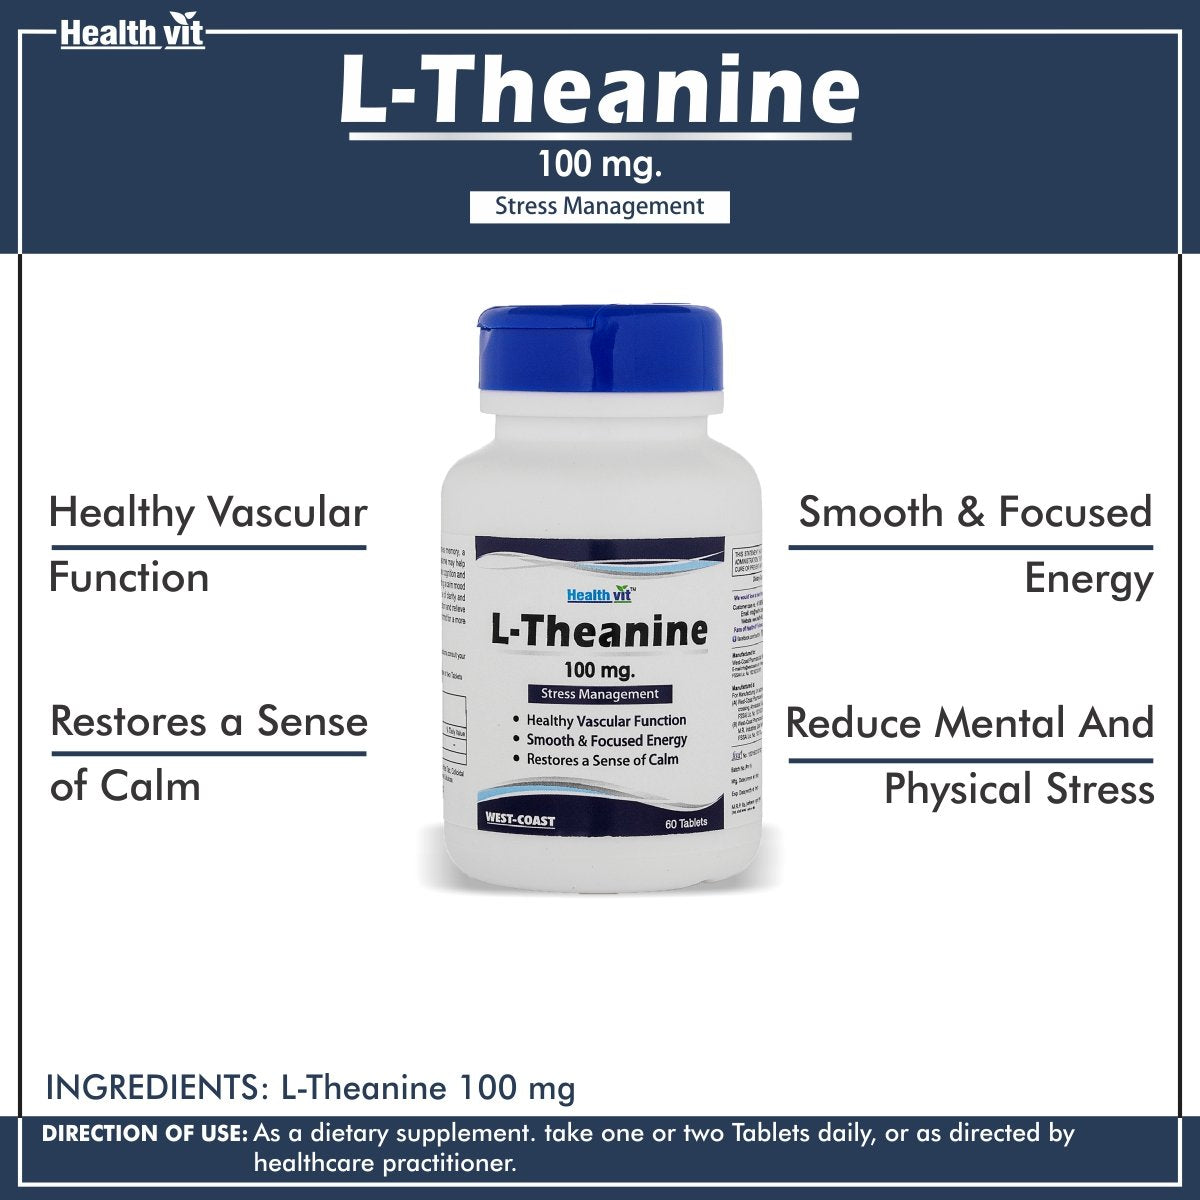 Healthvit L-Theanine 100mg For Stress Management | Healthy Vascular Function | Smooth & Focused Energy | Restores a Sense of Calm | Vegan And Gluten Free | 60 Tablets